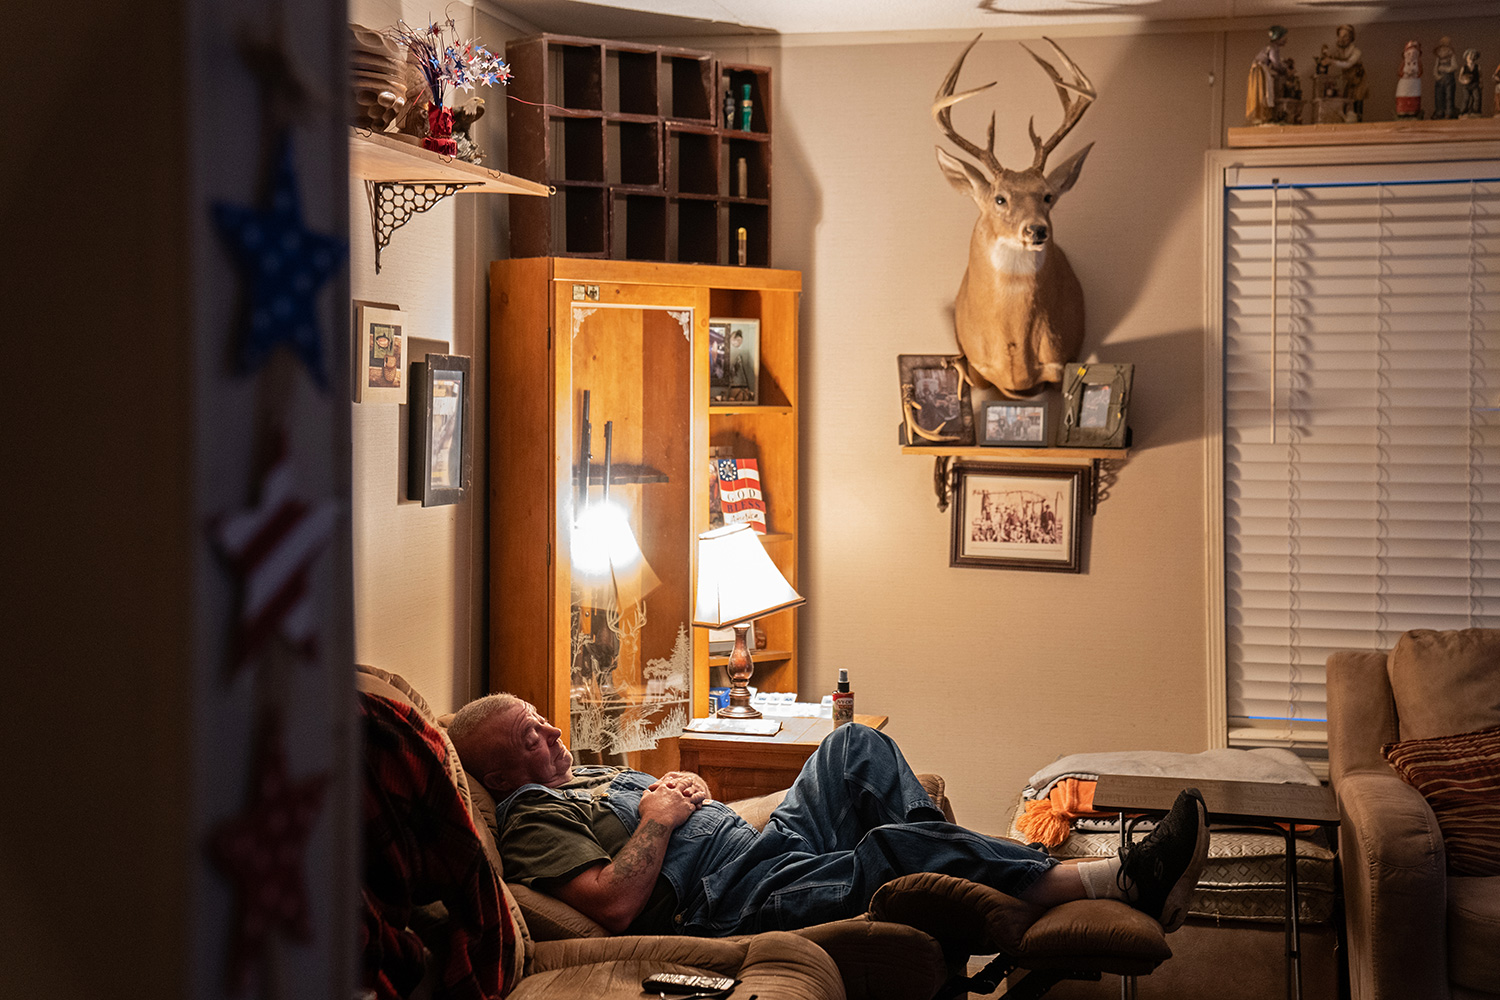 man naps in living room with deer head, photos